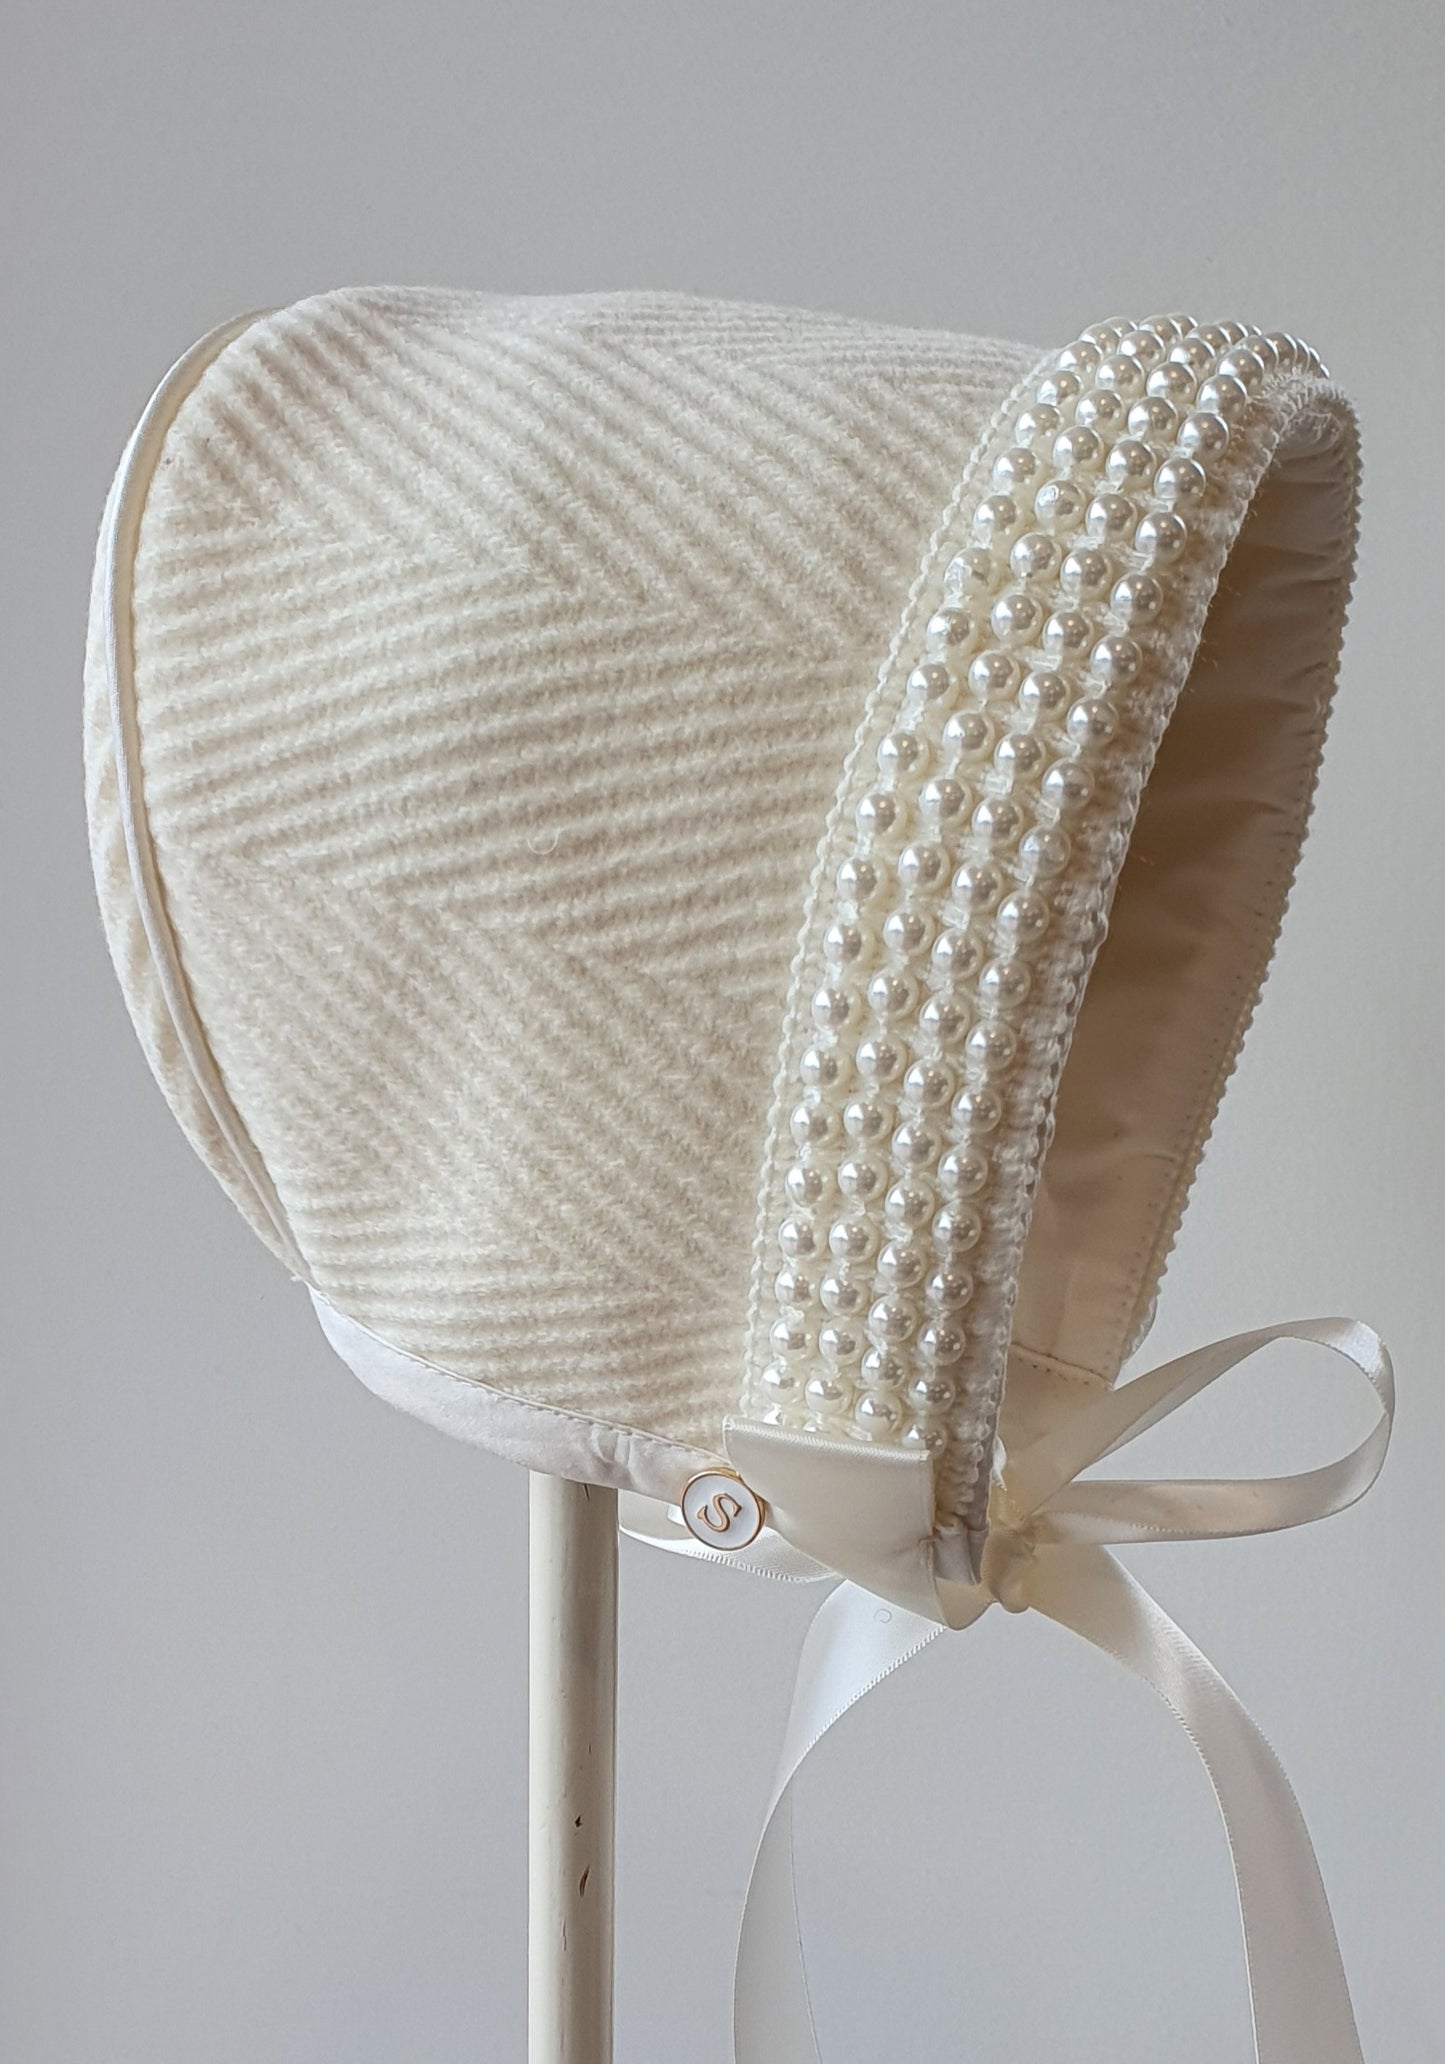 Exclusive Cream Wool Bonnet, with pearl trim